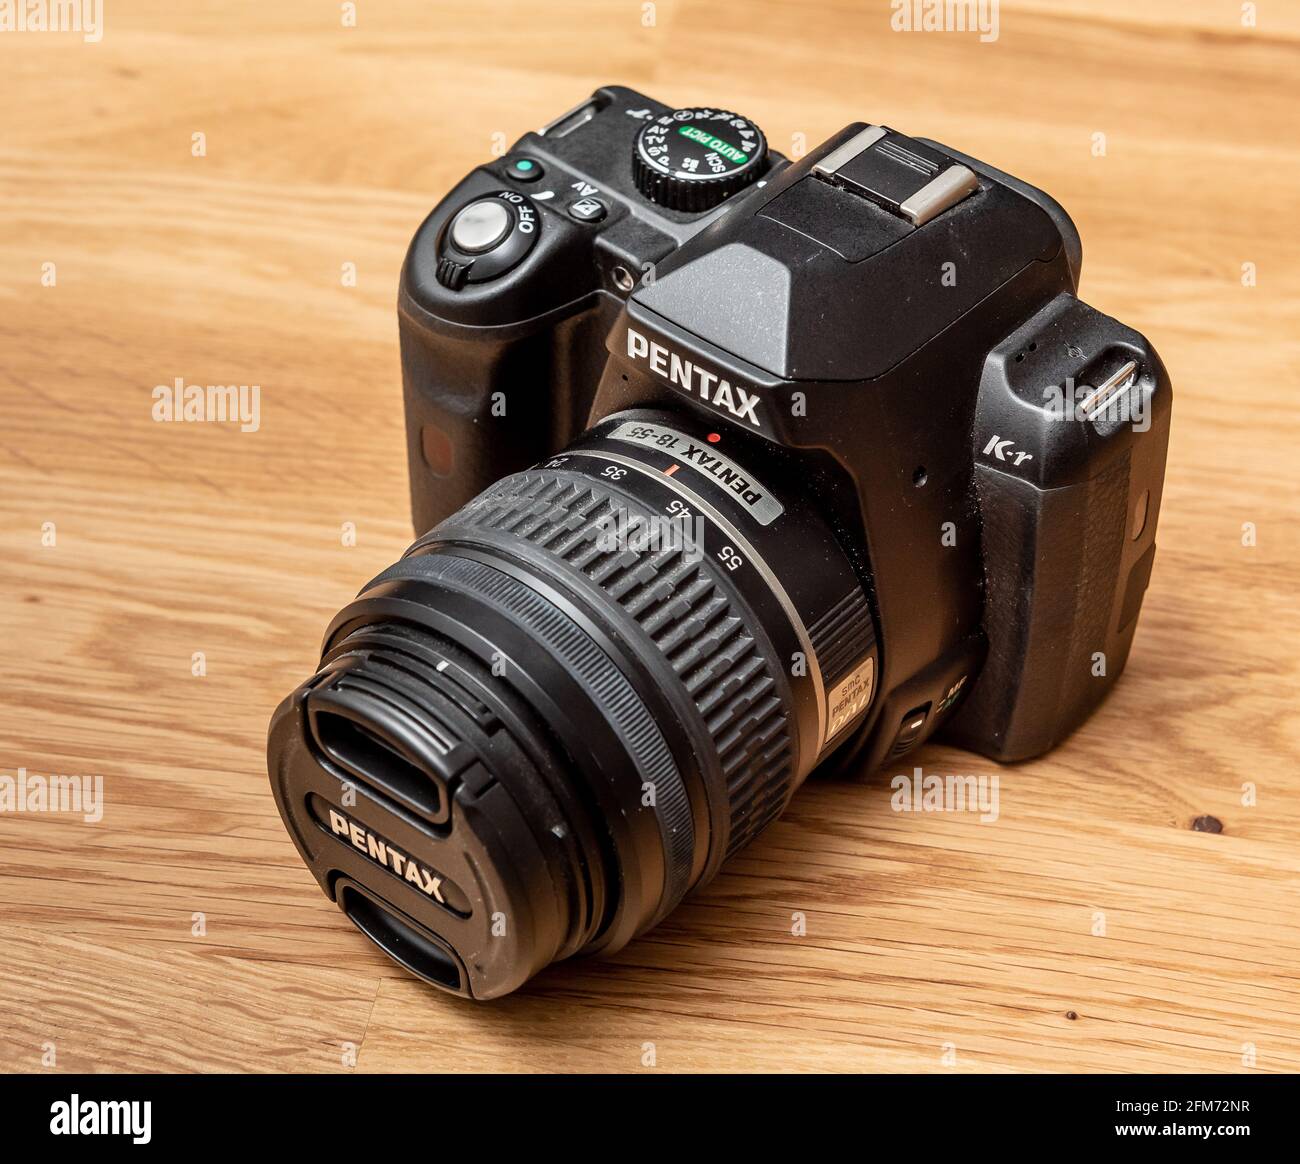 Gothenburg, Sweden - May 04 2019: Pentax K-r digital SLR with a 18-55mm  lens on a wooden table Stock Photo - Alamy